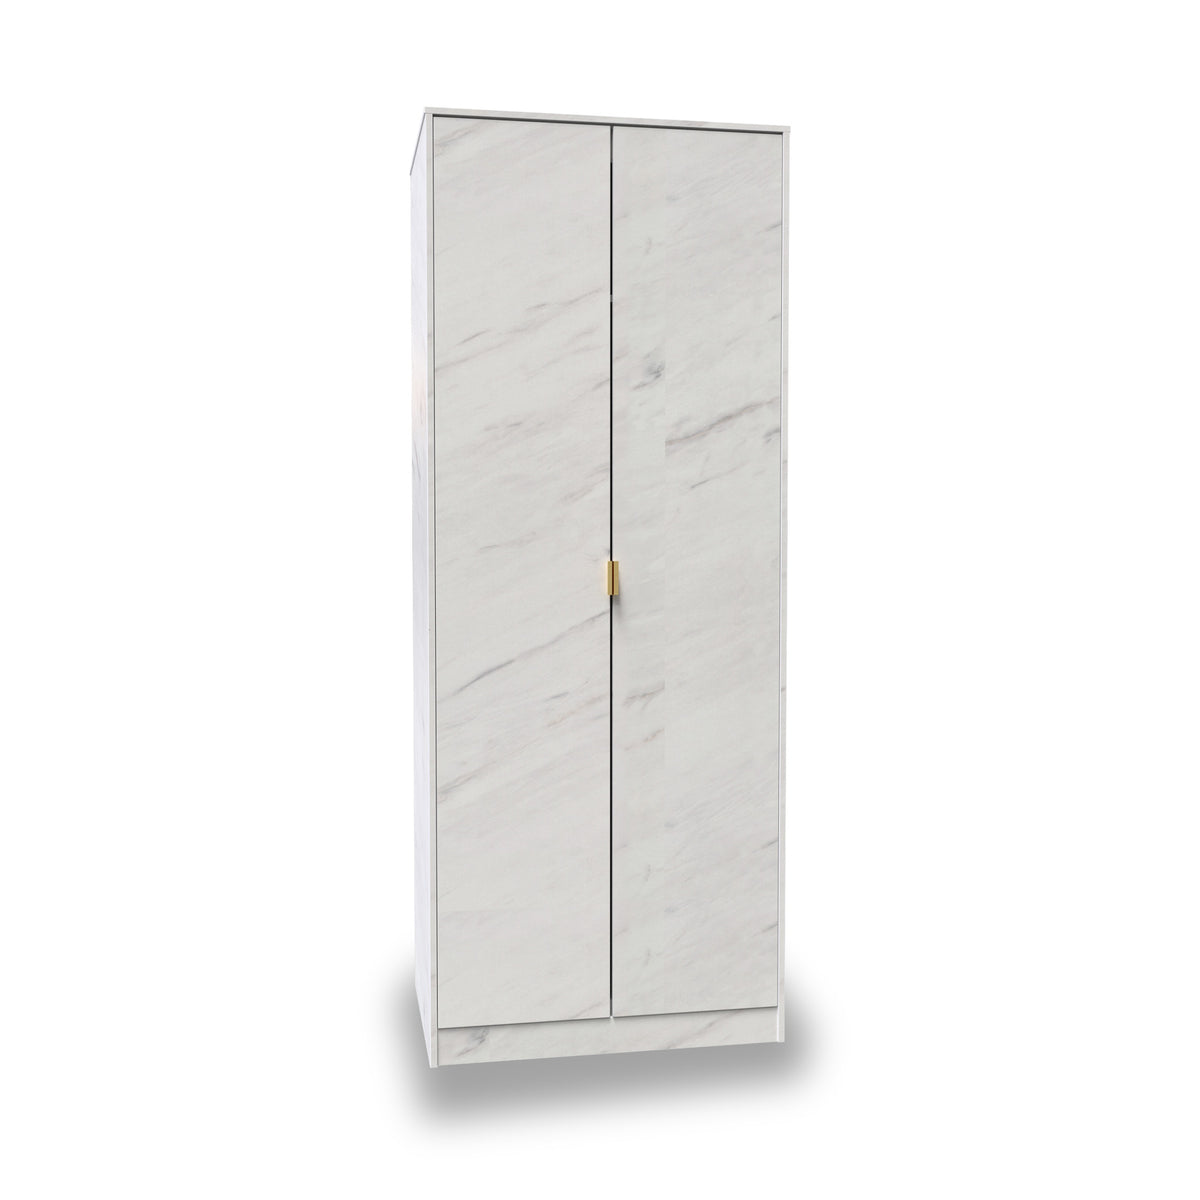 Moreno Marble Effect 2 Door Double Wardrobe from Roseland Furniture